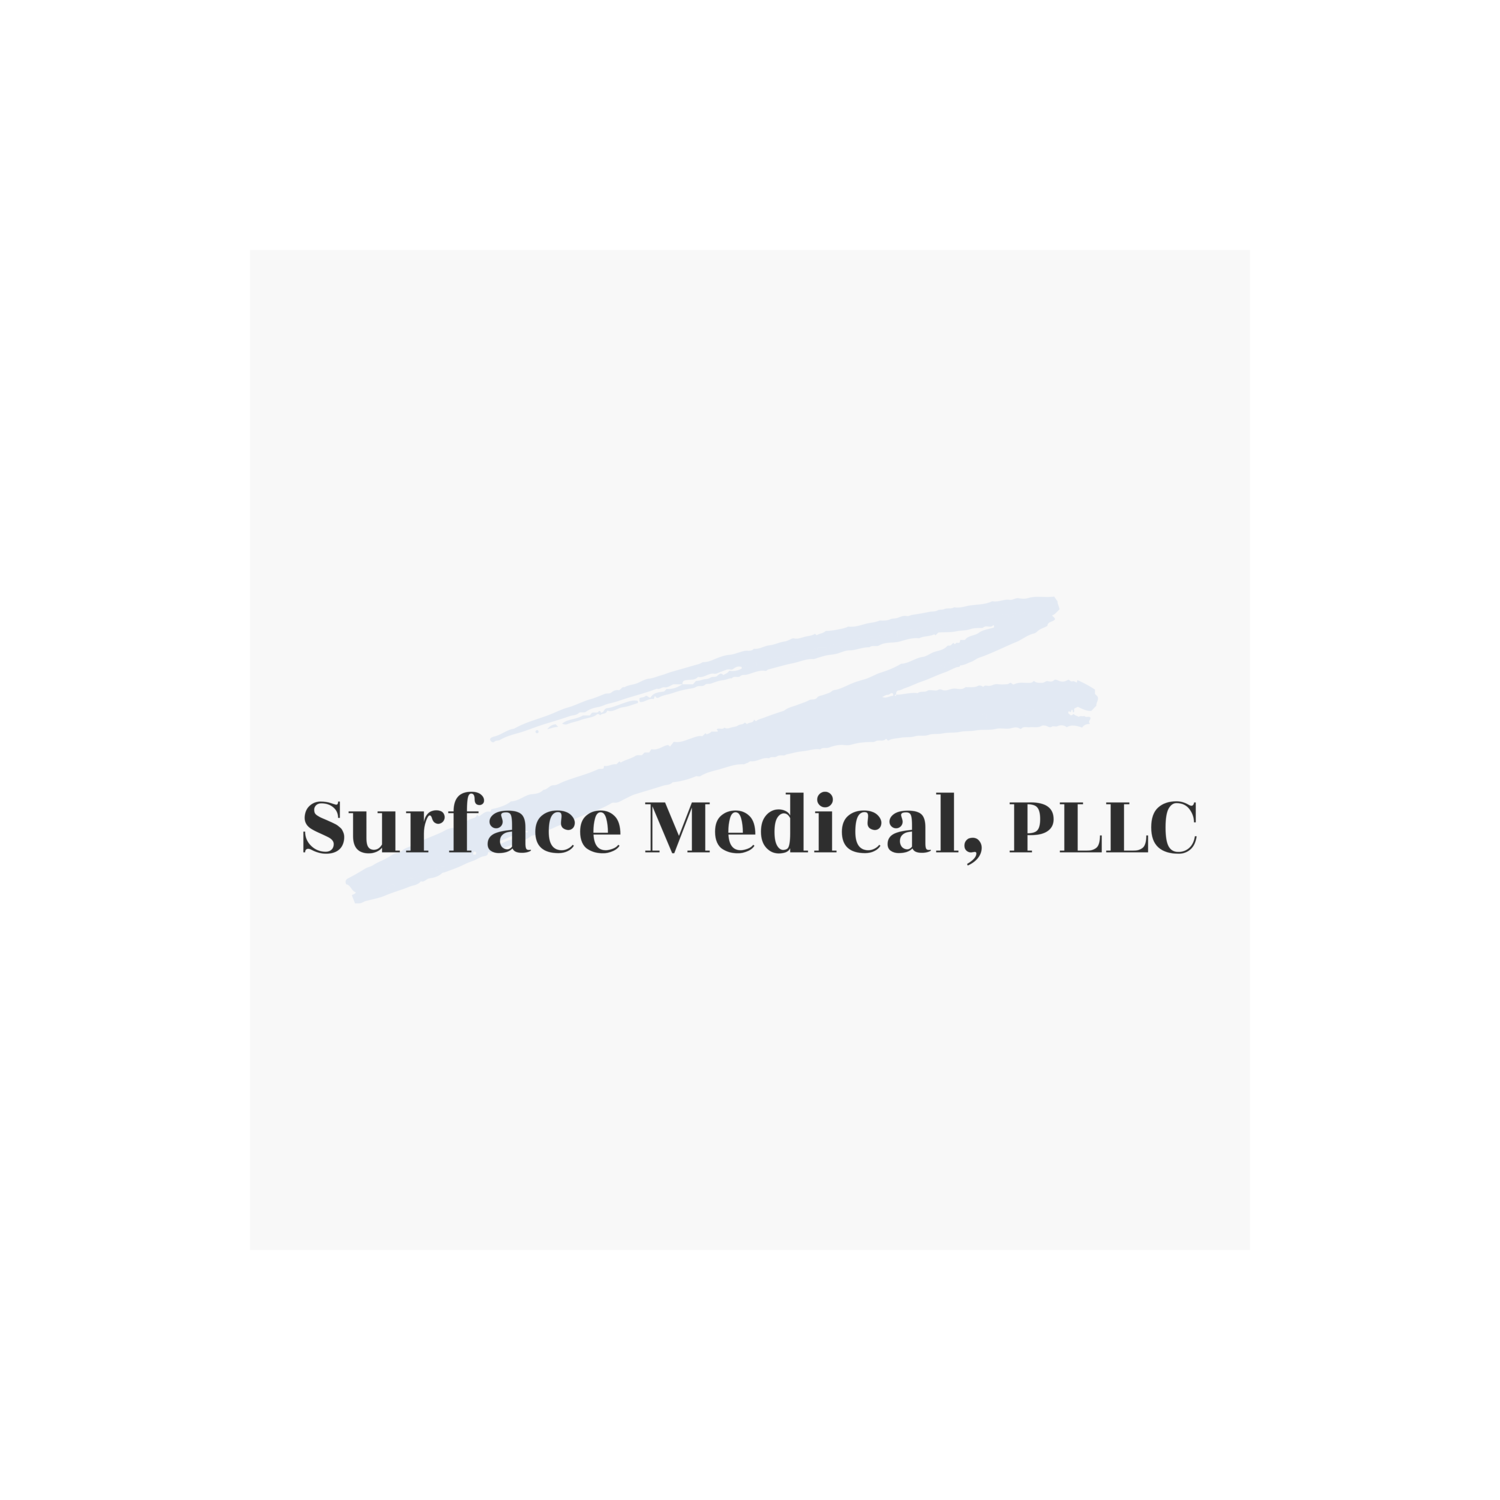 Surface Medical PLLC